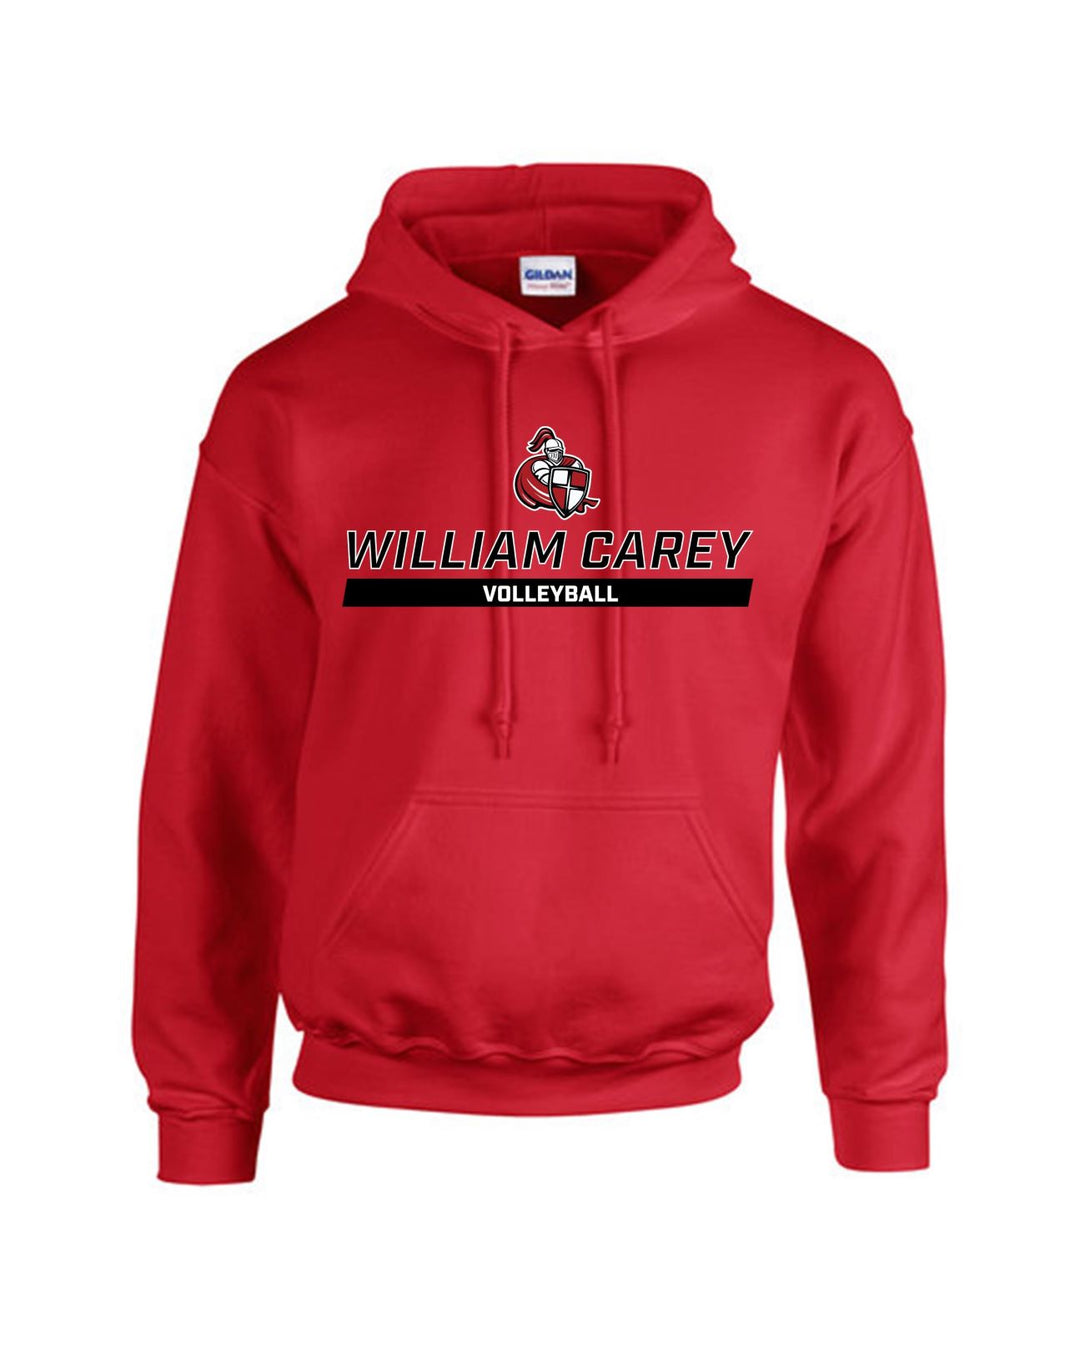 Carey Volleyball Men's Hoody WCU Volleyball Red WC W/Crusader - Third Coast Soccer